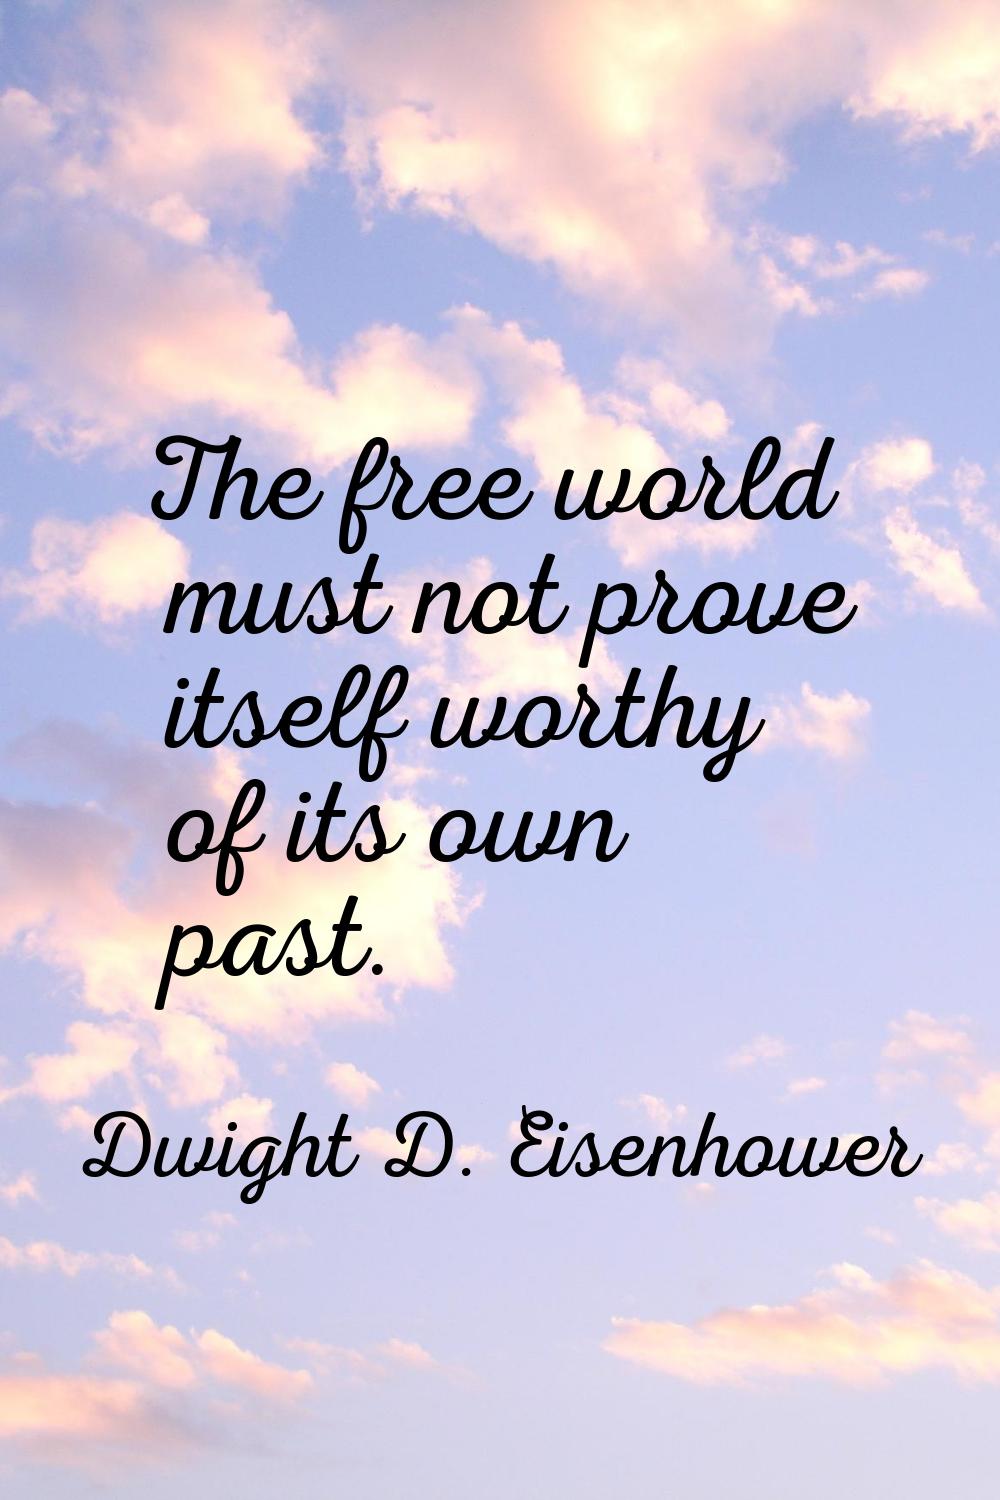 The free world must not prove itself worthy of its own past.